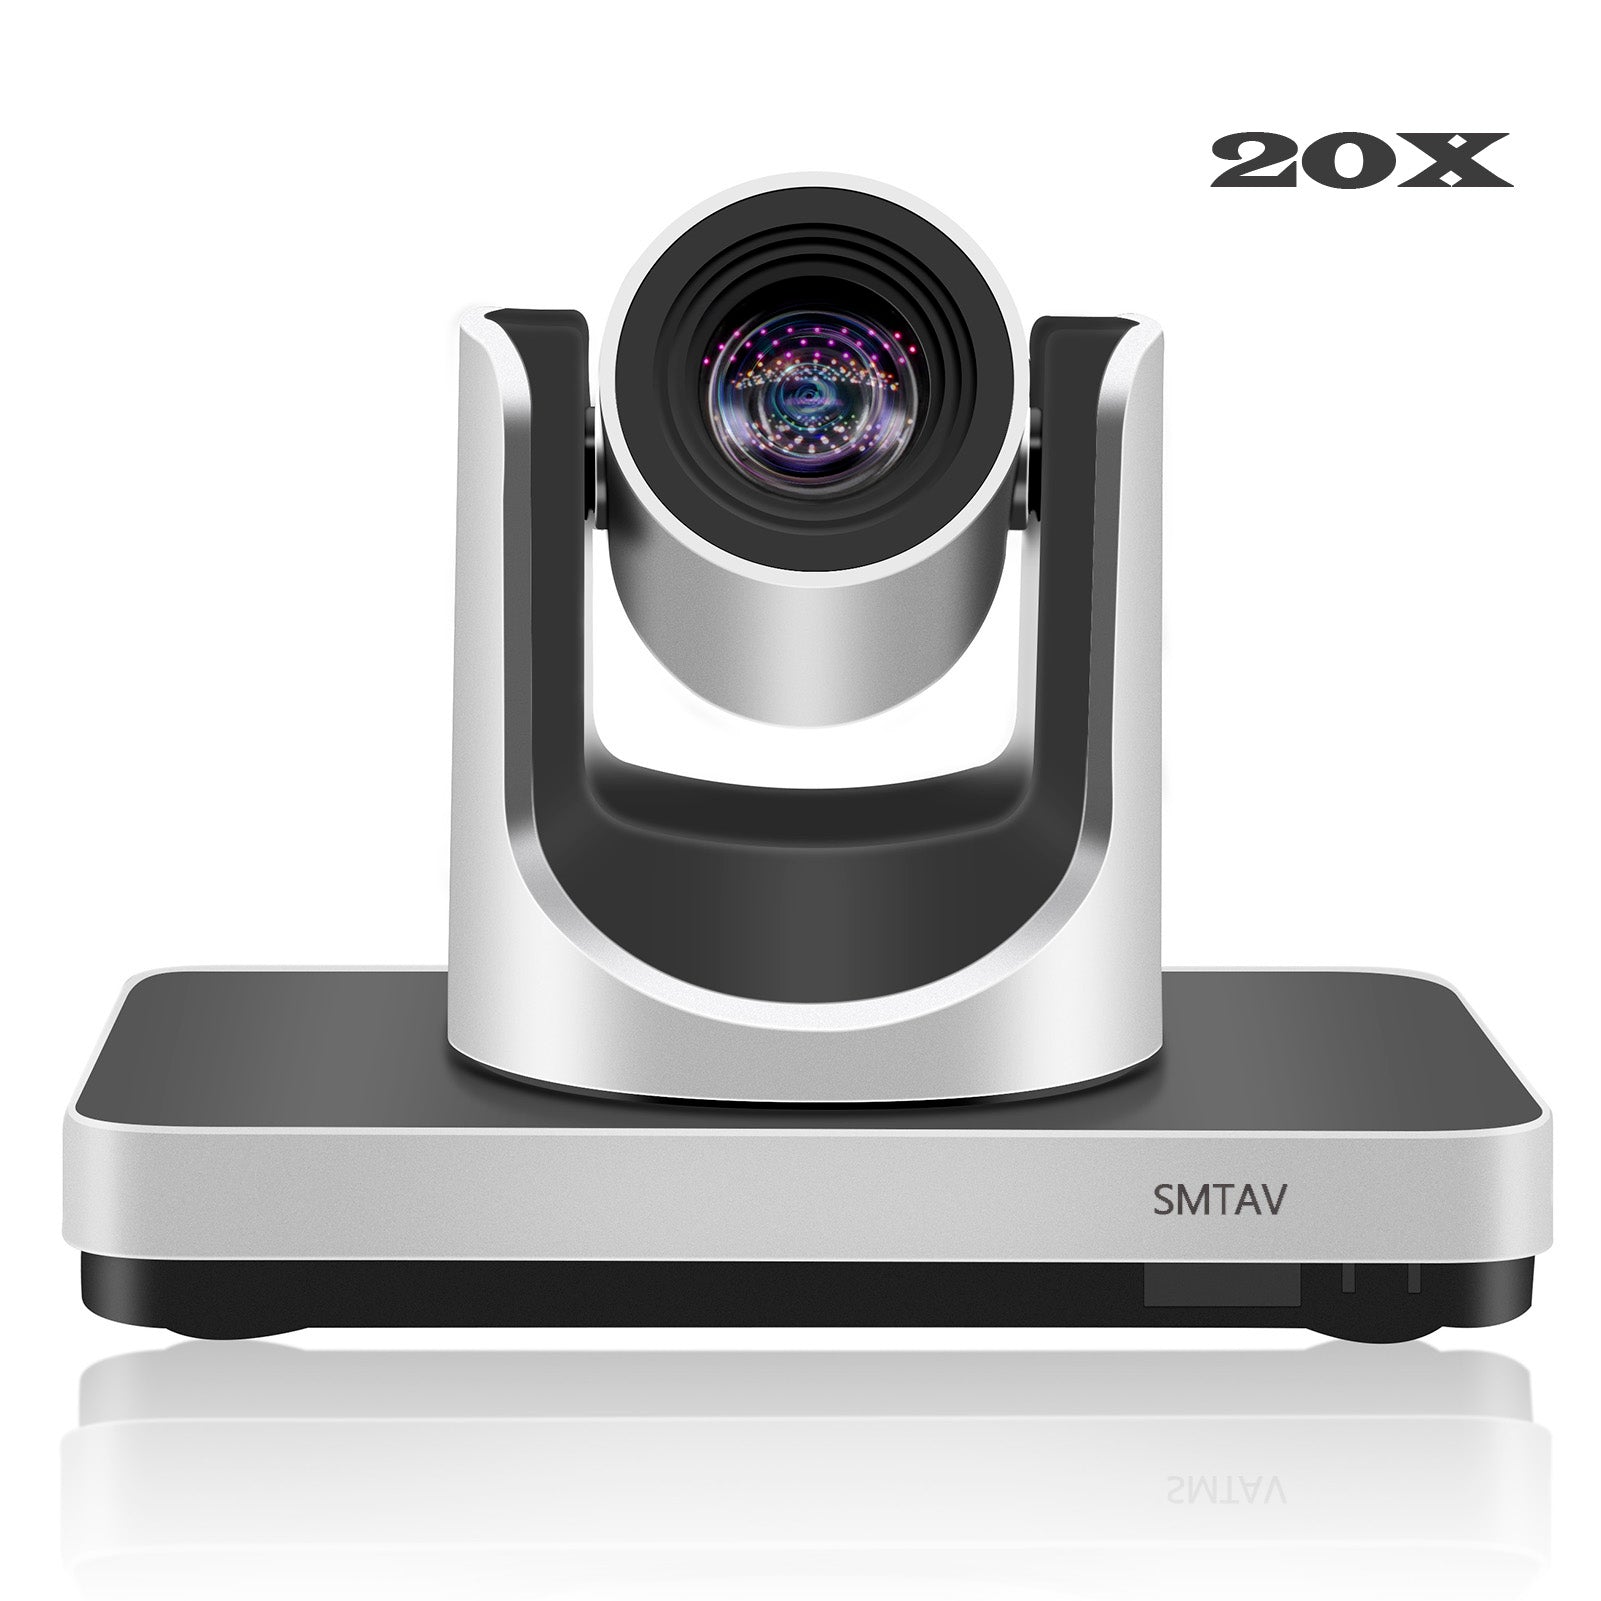 Professional video conferencing camera, Pro-BV20S